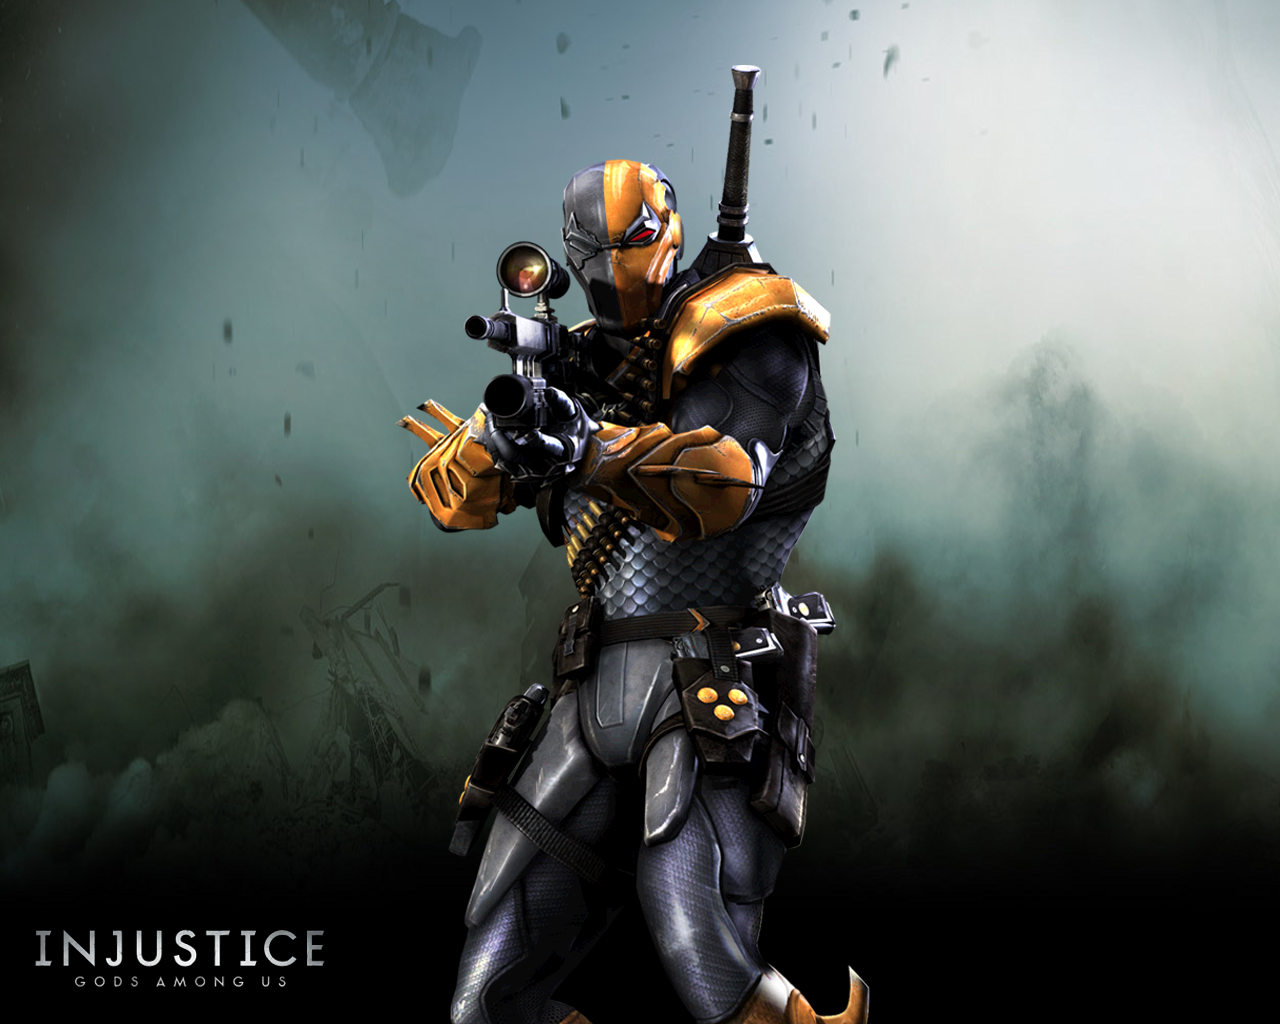 Game Art X: Injustice: Gods Among Us Wallpaper. Deathstroke, Injustice, Deathstroke the terminator